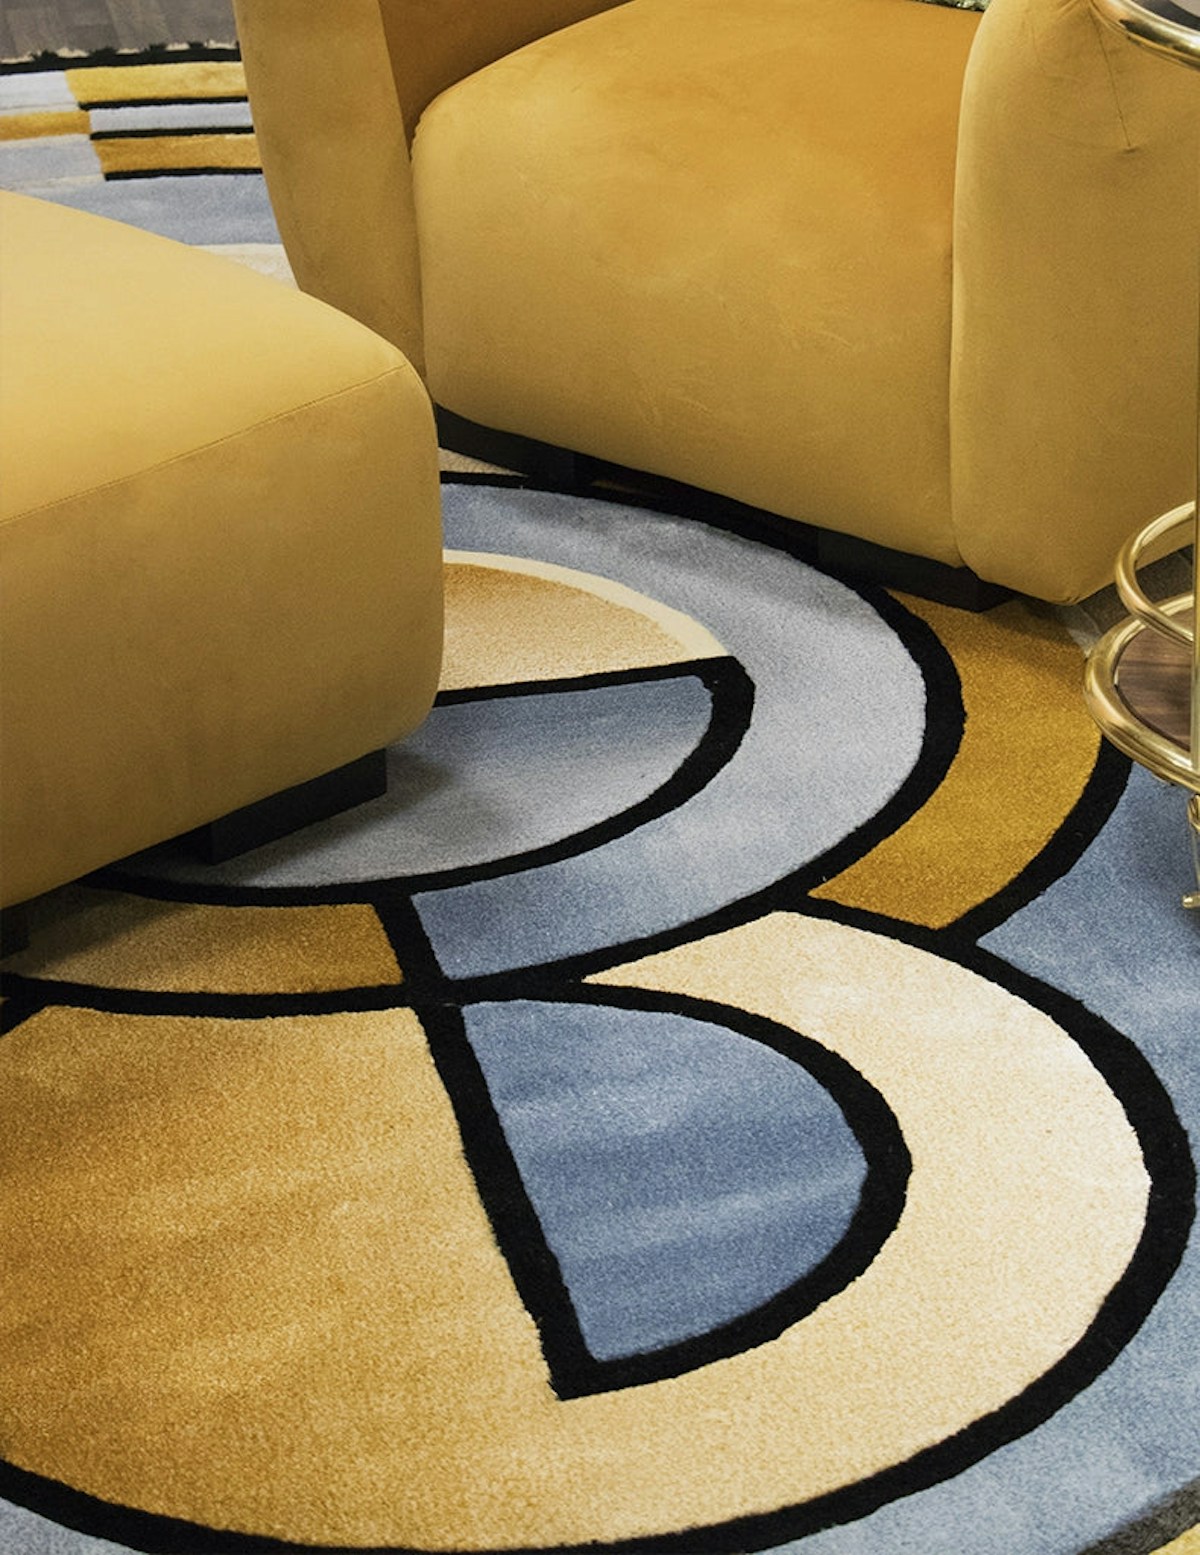 Statement Rugs - 7 Ways To Make a Statement In Your Living Room - LuxDeco.com Style Guide